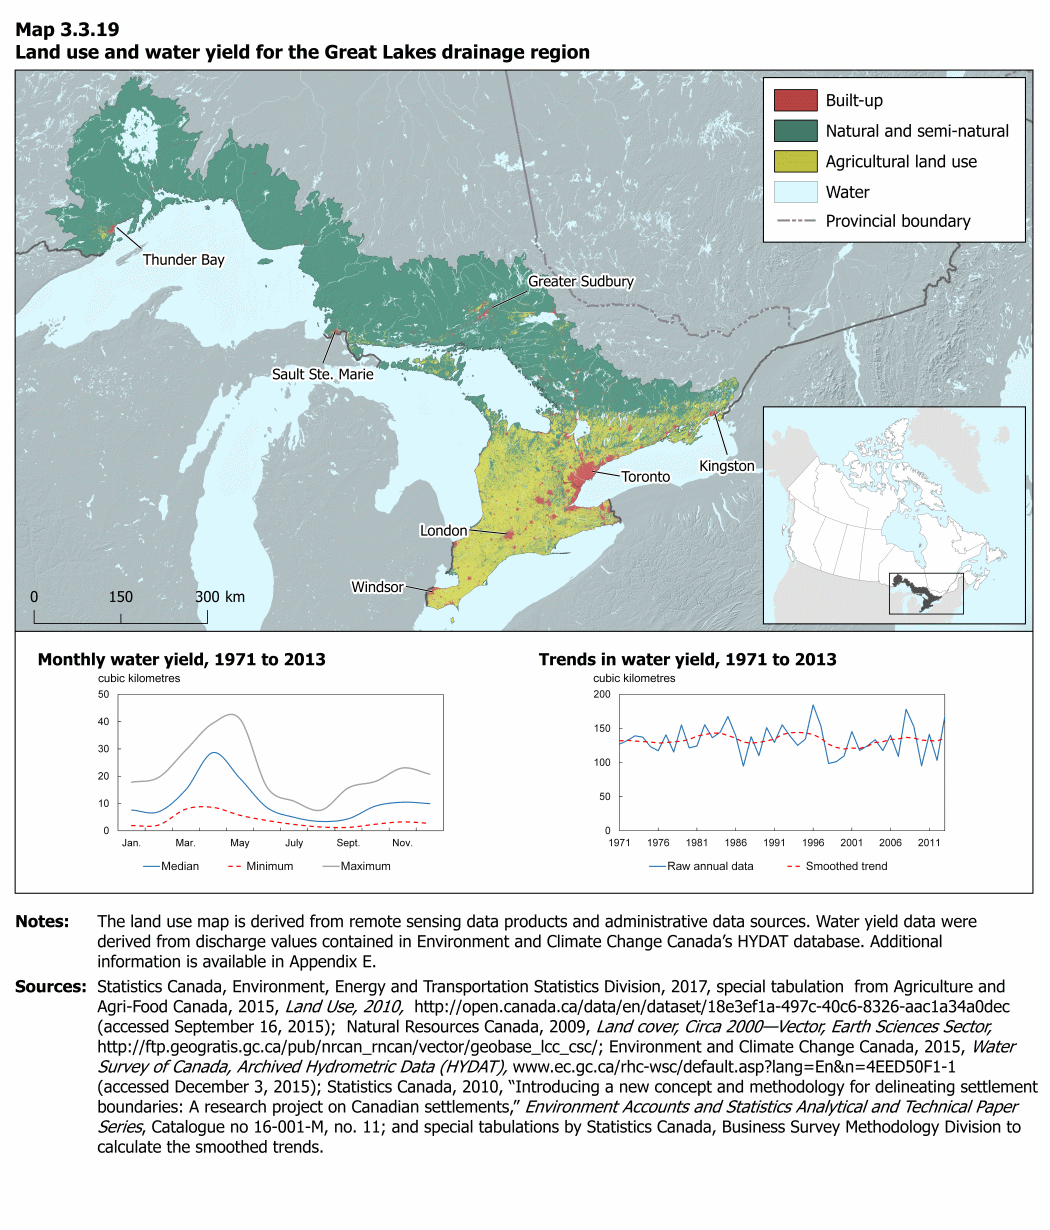 Map 3.3.19 Land use and water yield for the Great Lakes drainage region